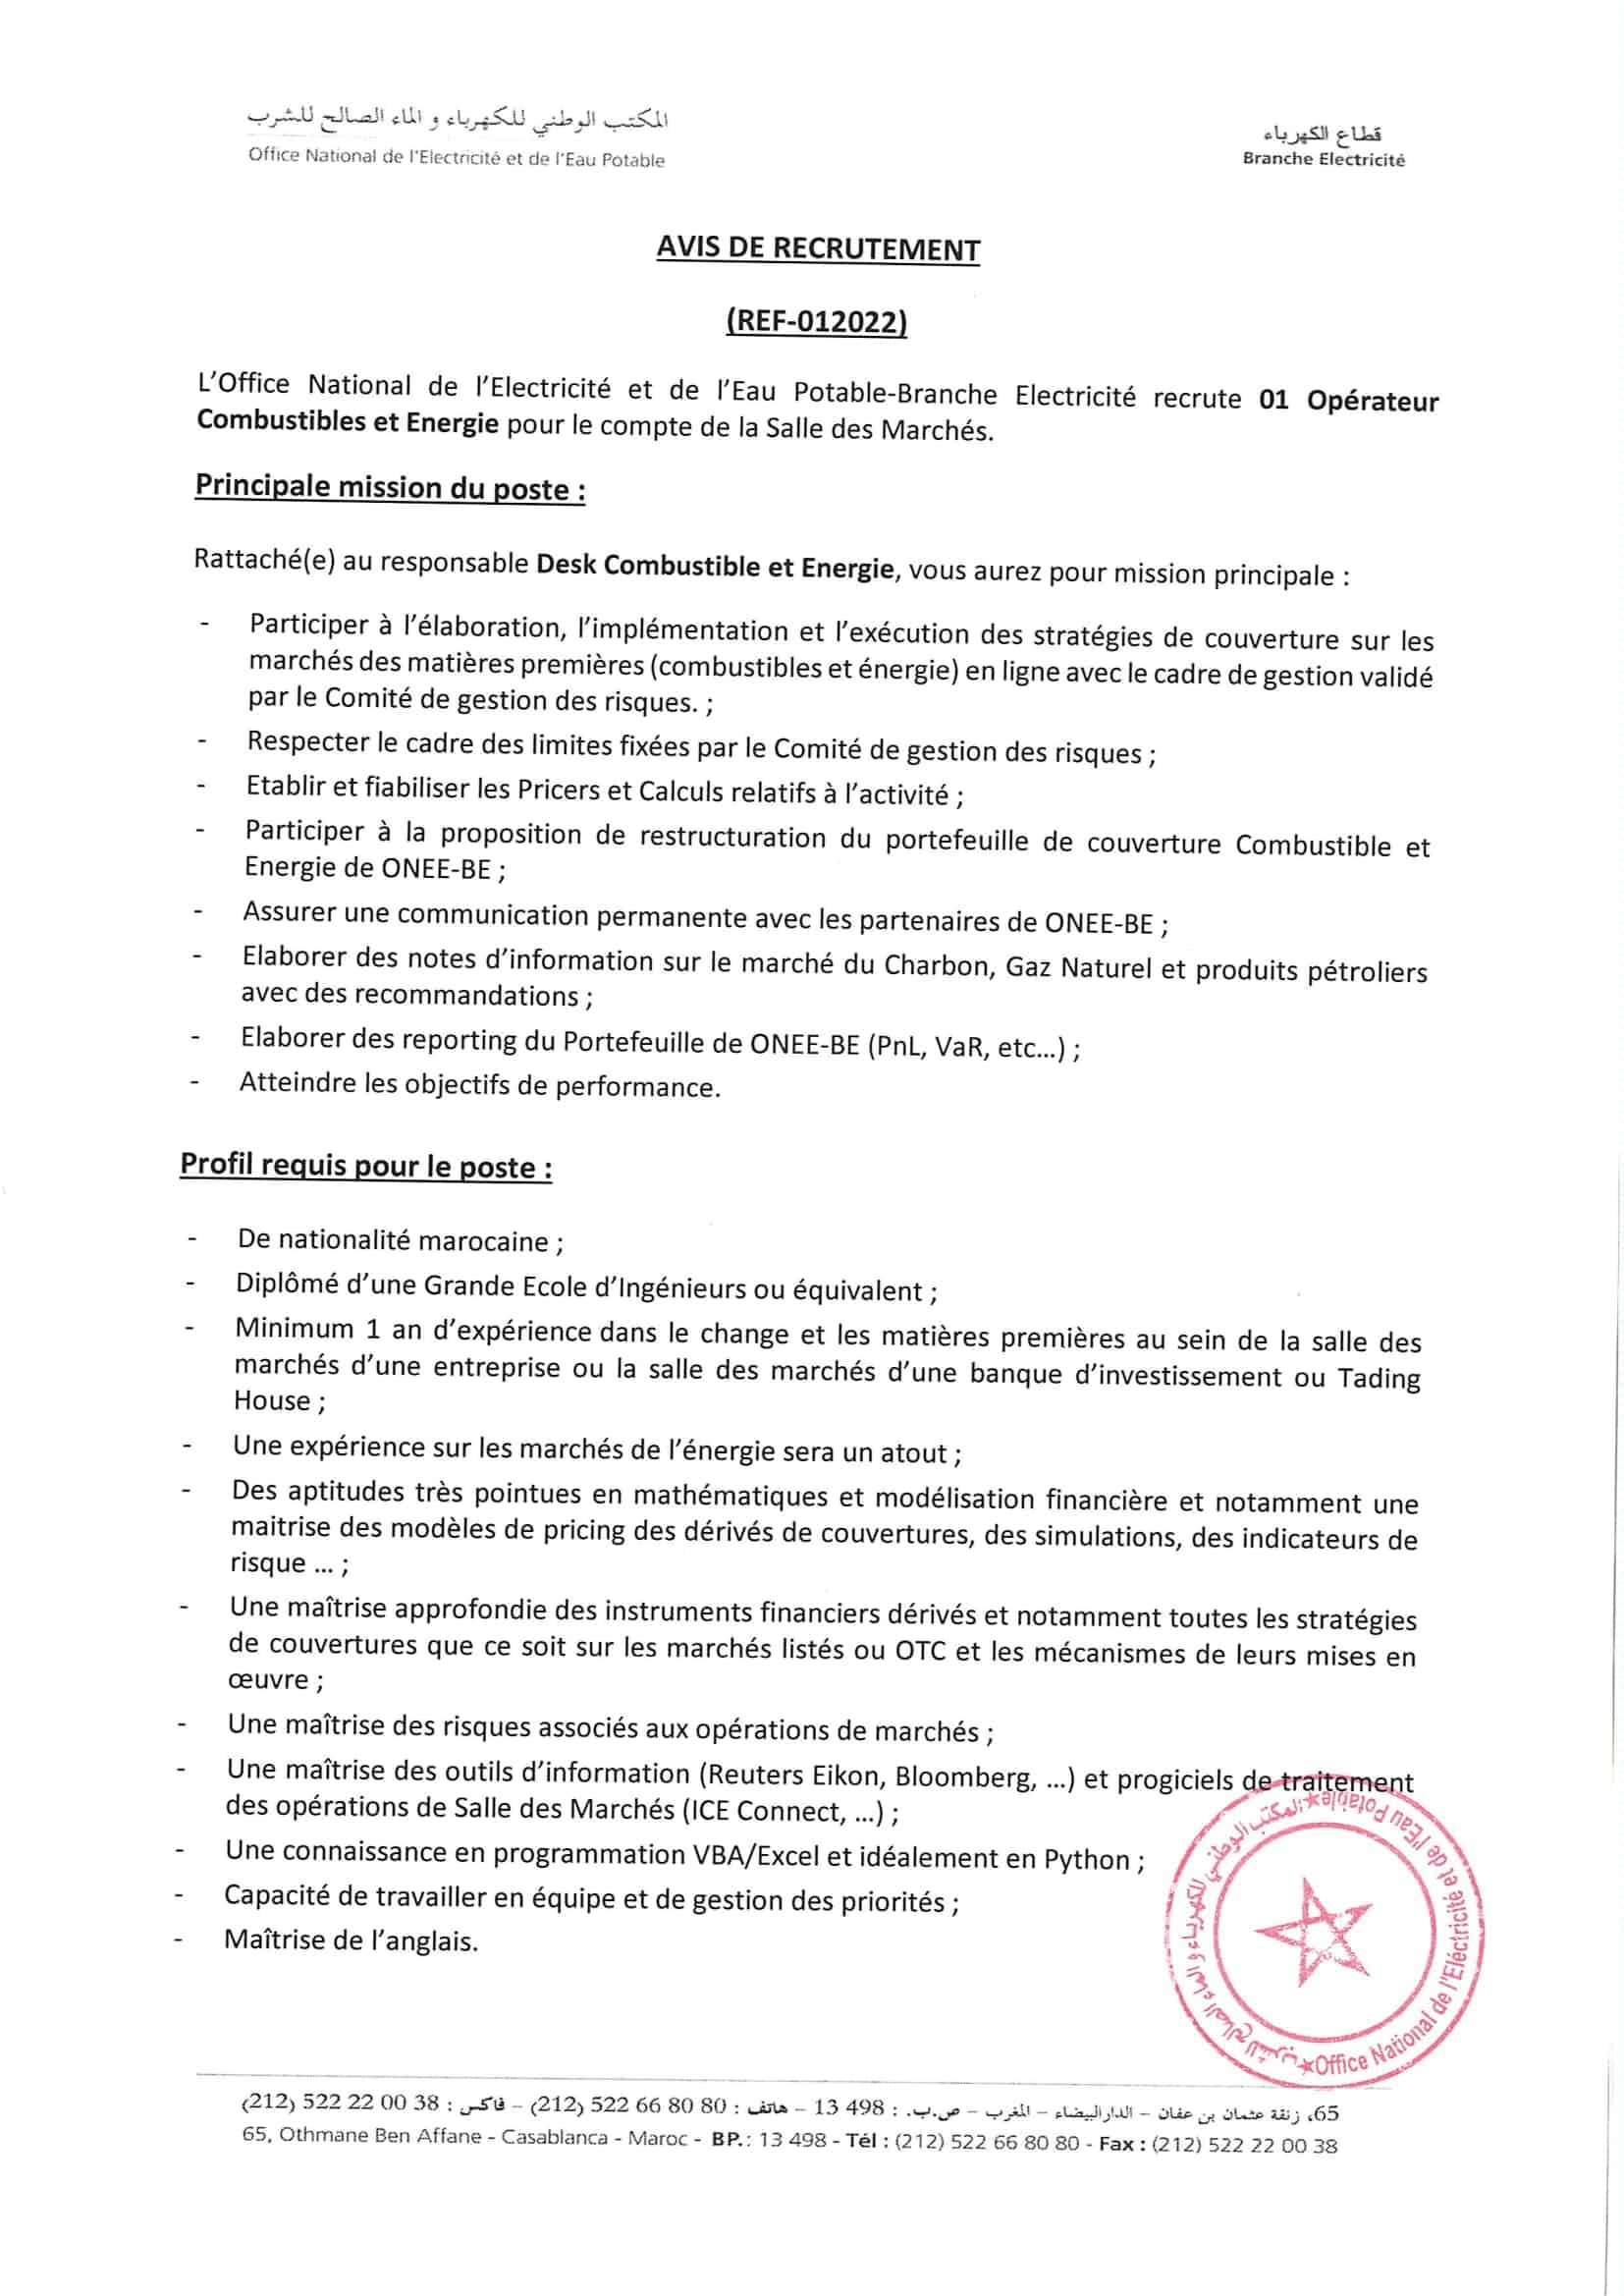 ONEE-Branche-Electricite-Concours-Emploi-Recrutement-marocconcours